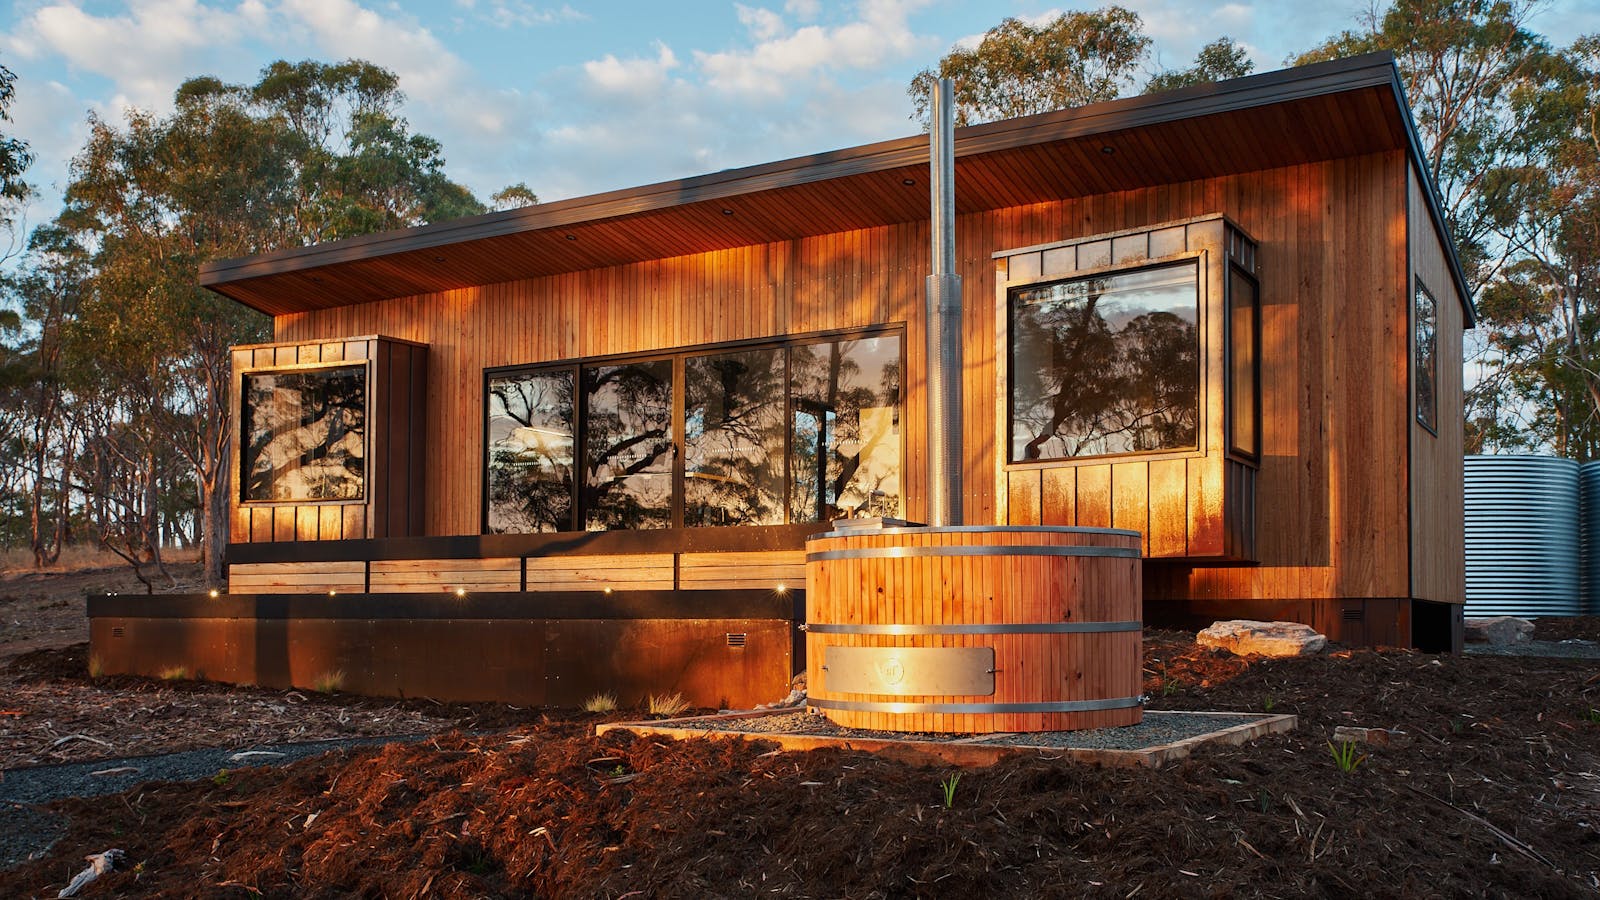 The Croft at Arden, with Blue Gum cladding from the property and woodfired hot tub